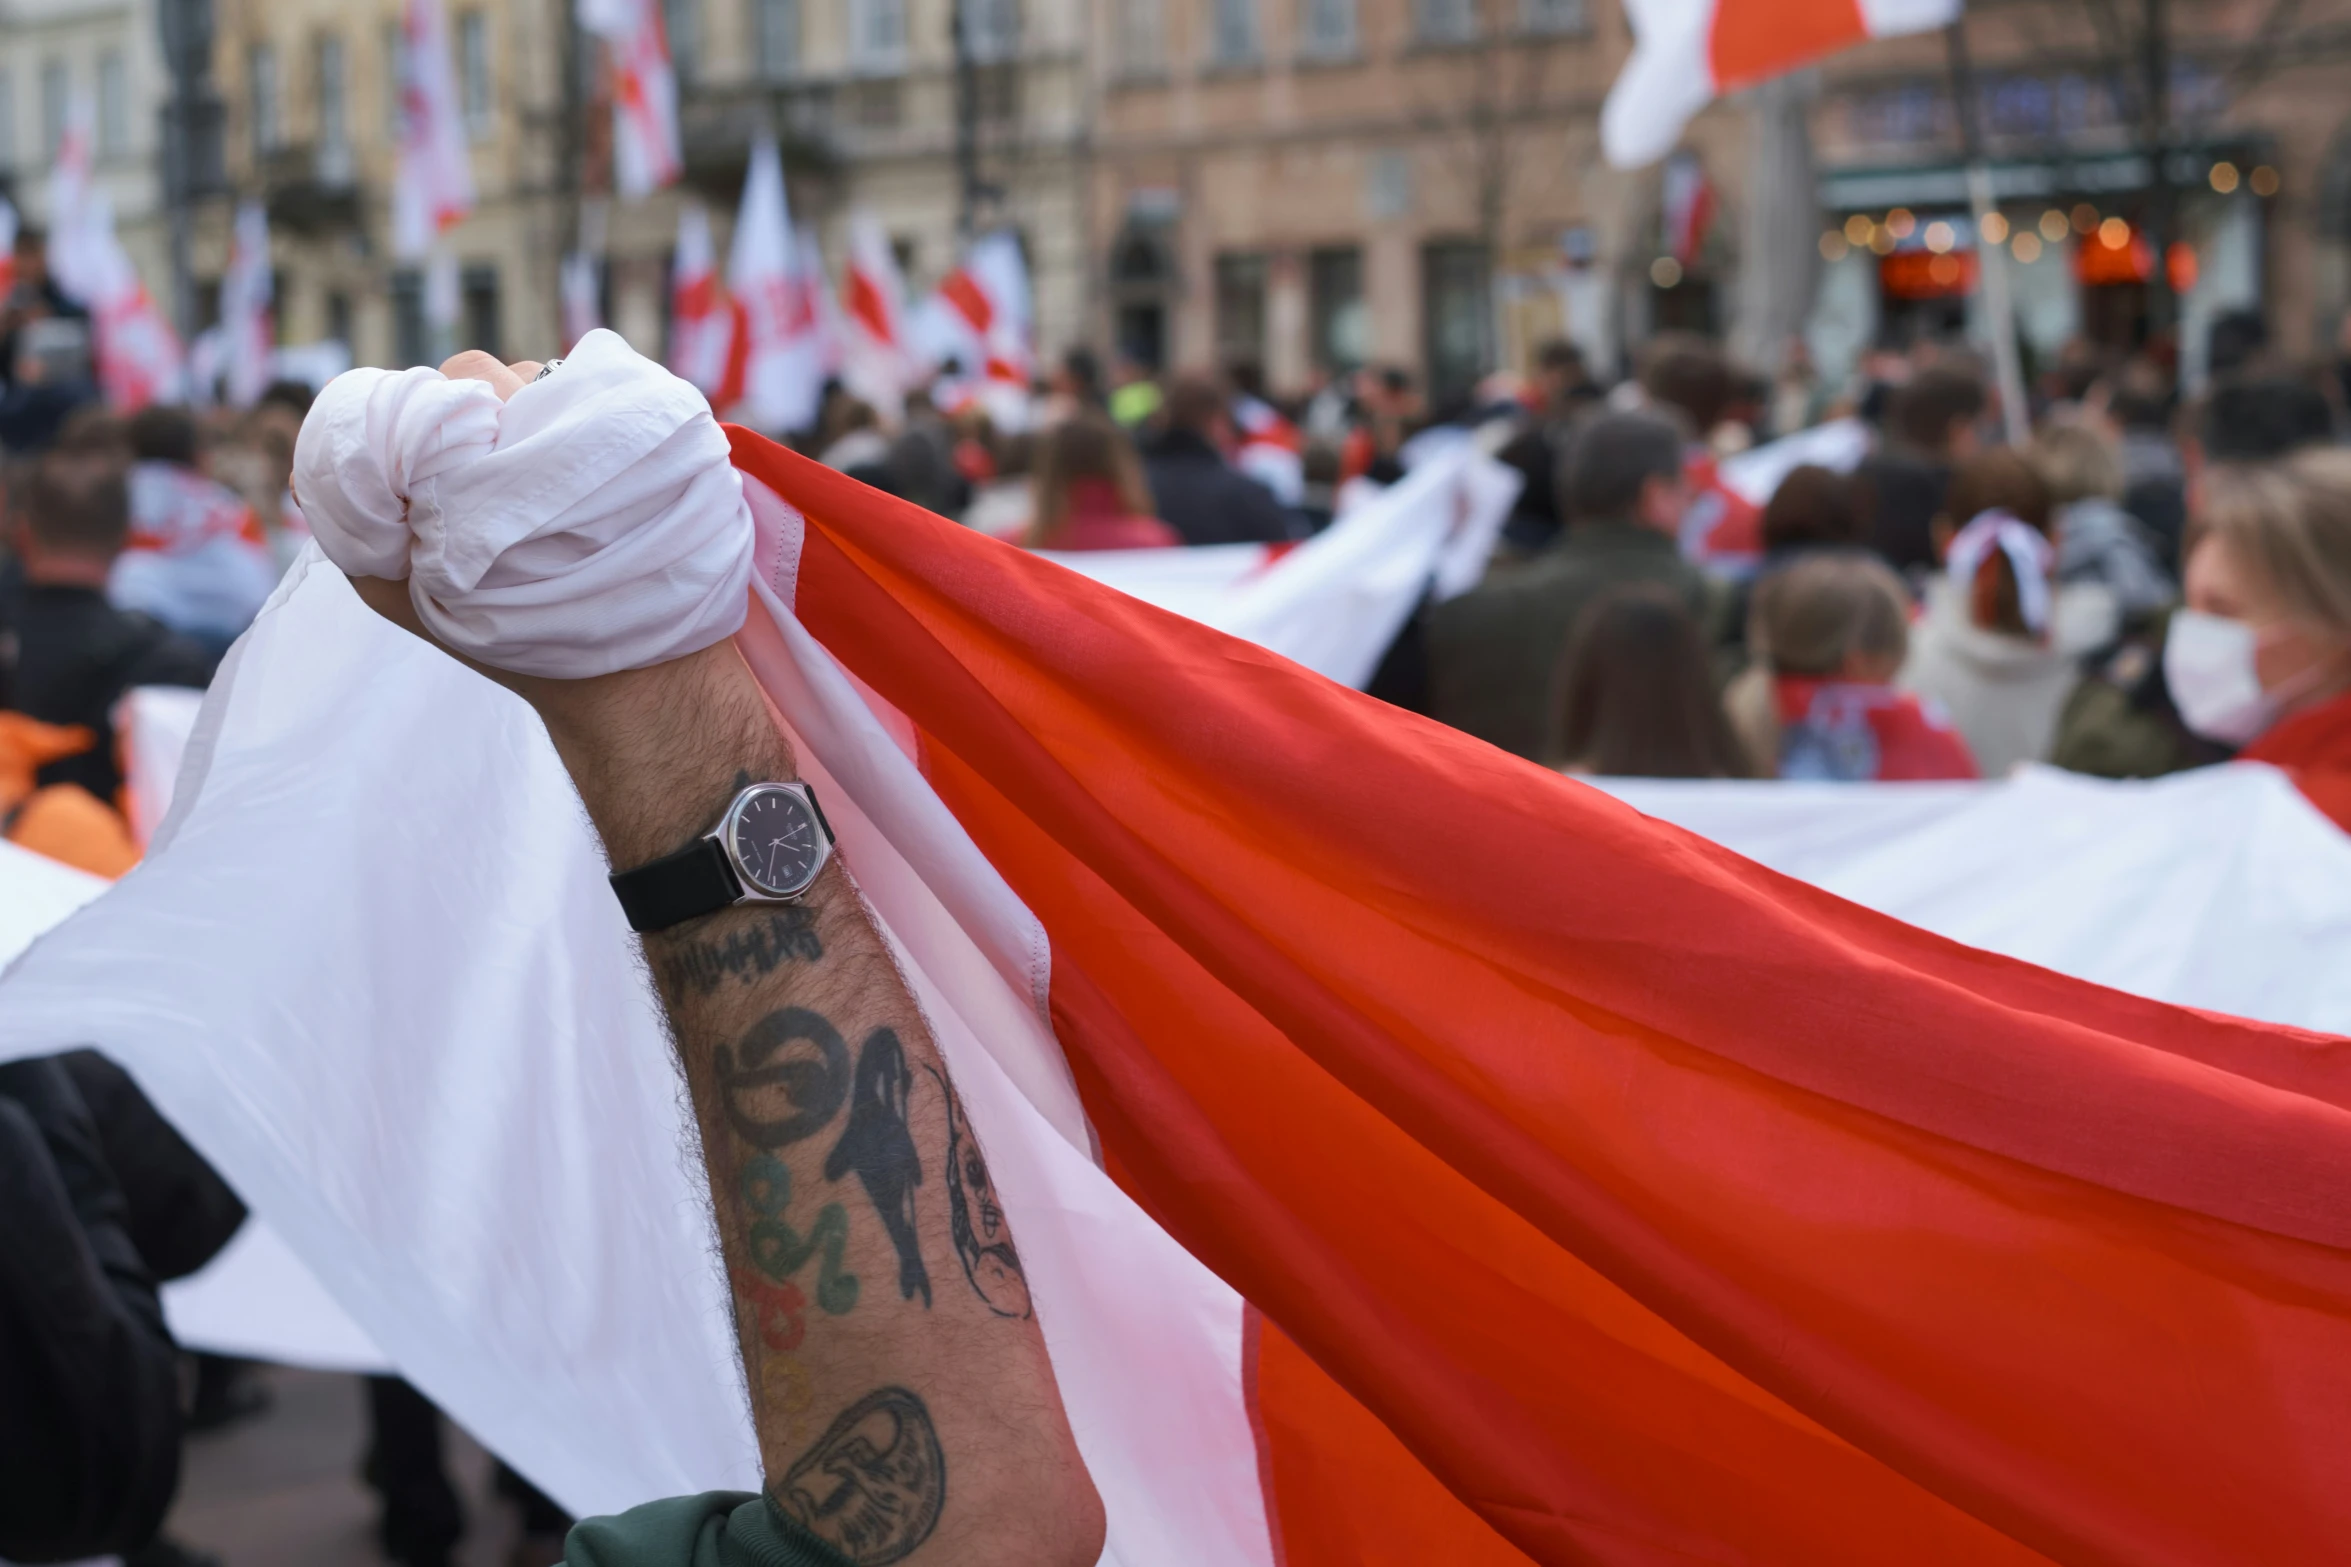 a person with a red and white flag in his hand